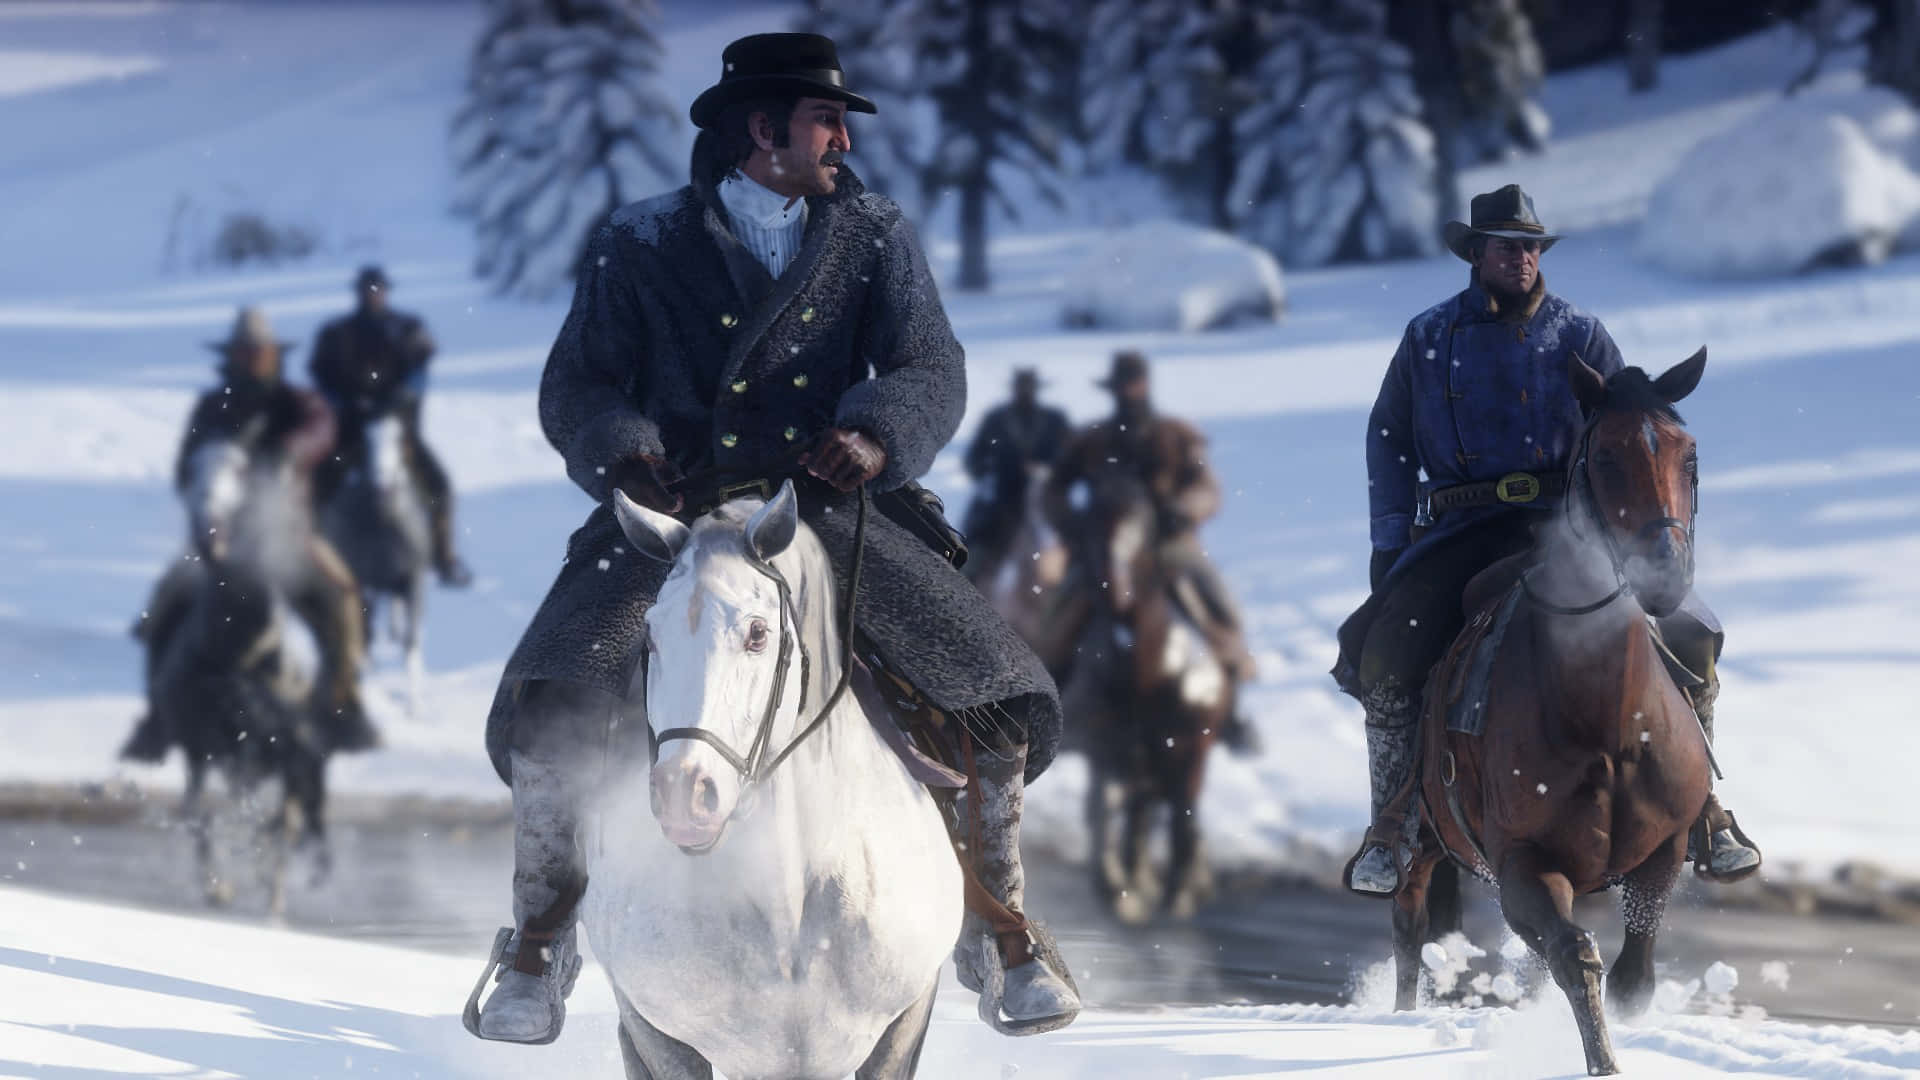 Best Red Dead Redemption 2 Cowboys Traveling In The Snow Background